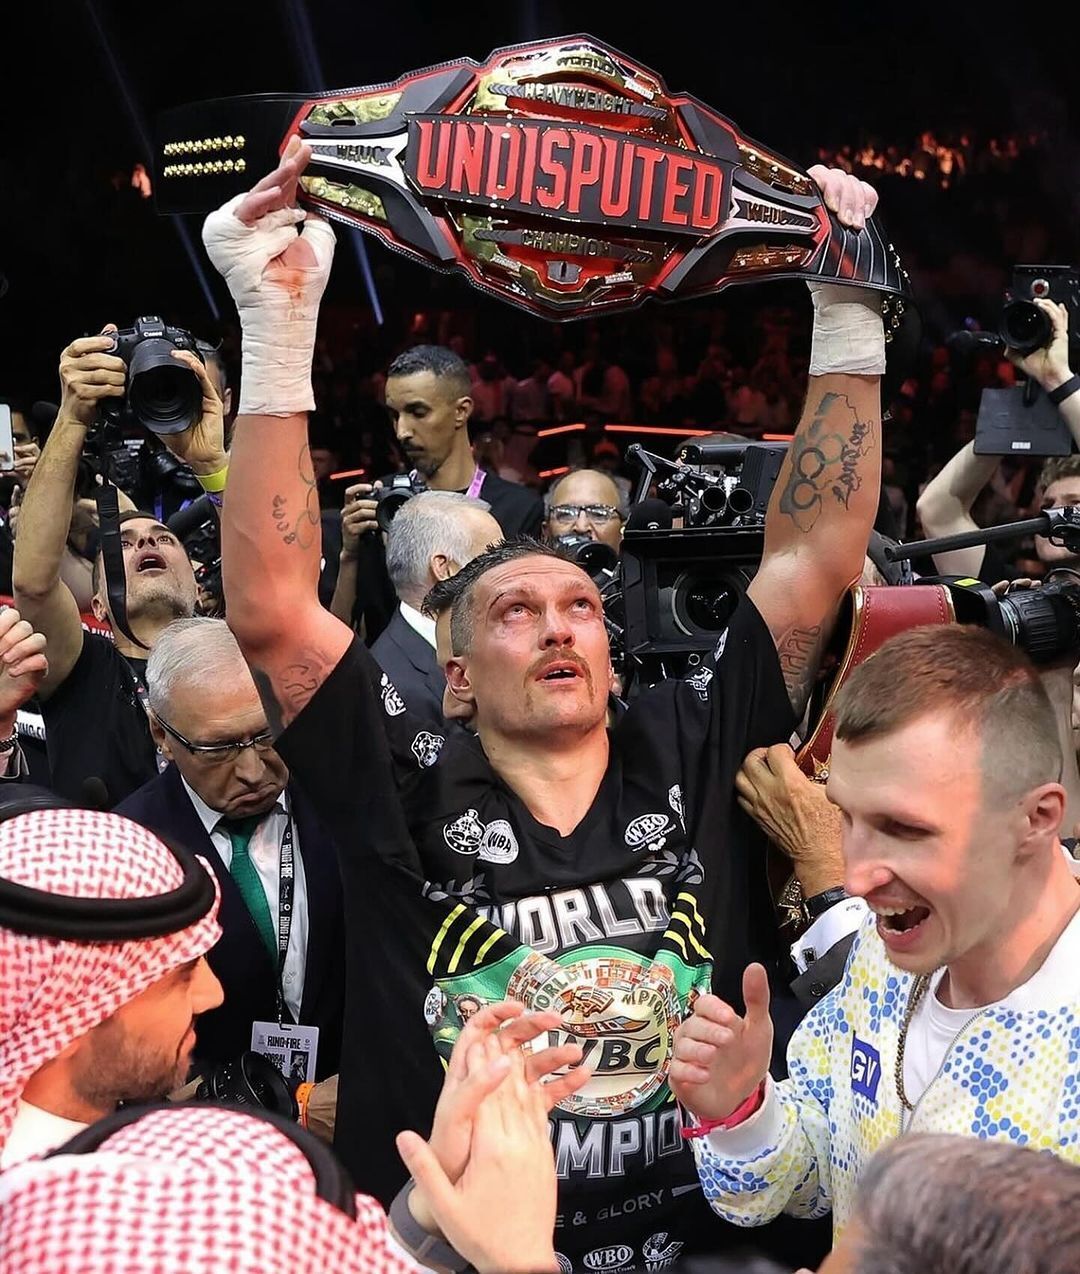 ''He lost touch with reality'': Russian boxer praises Usyk's victory over Fury